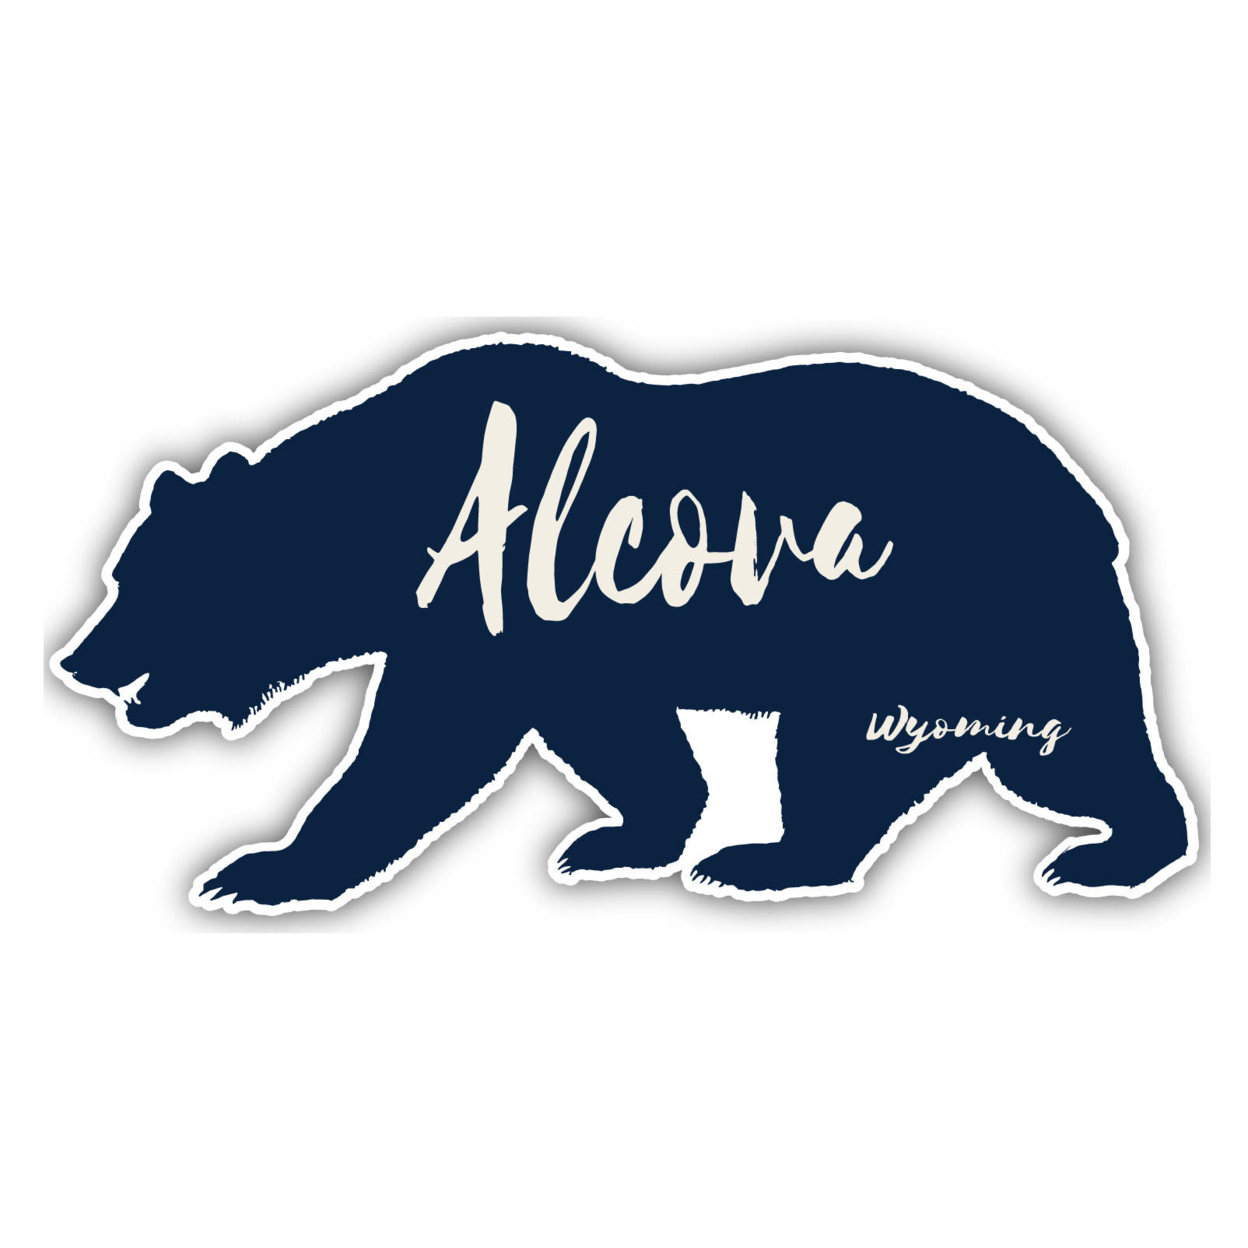 Alcova Wyoming Souvenir Decorative Stickers (Choose Theme And Size) - 4-Pack, 12-Inch, Bear